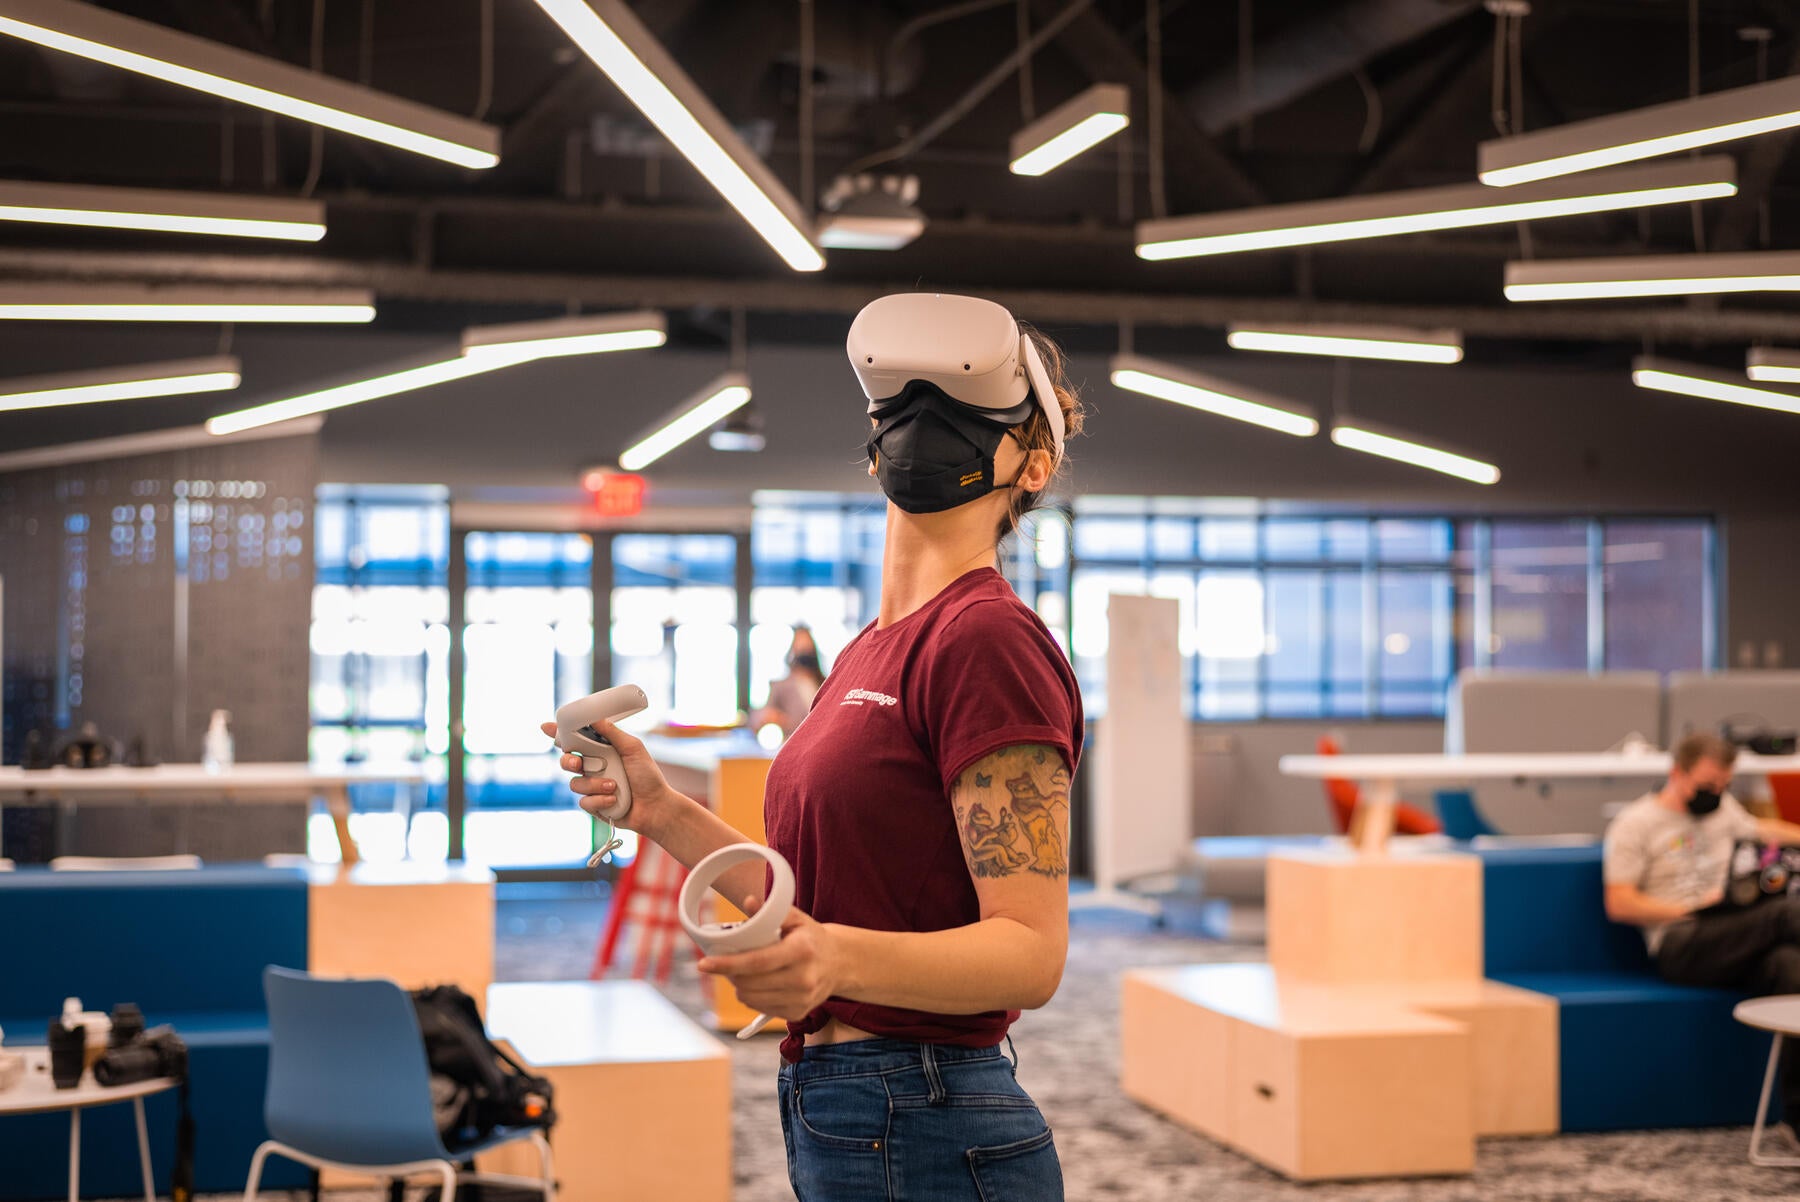 ASU’s Learning Futures’ Collaboratory, powered by Verizon 5G, in Creativity Commons. Photo credit: Mike Sanchez, ASU